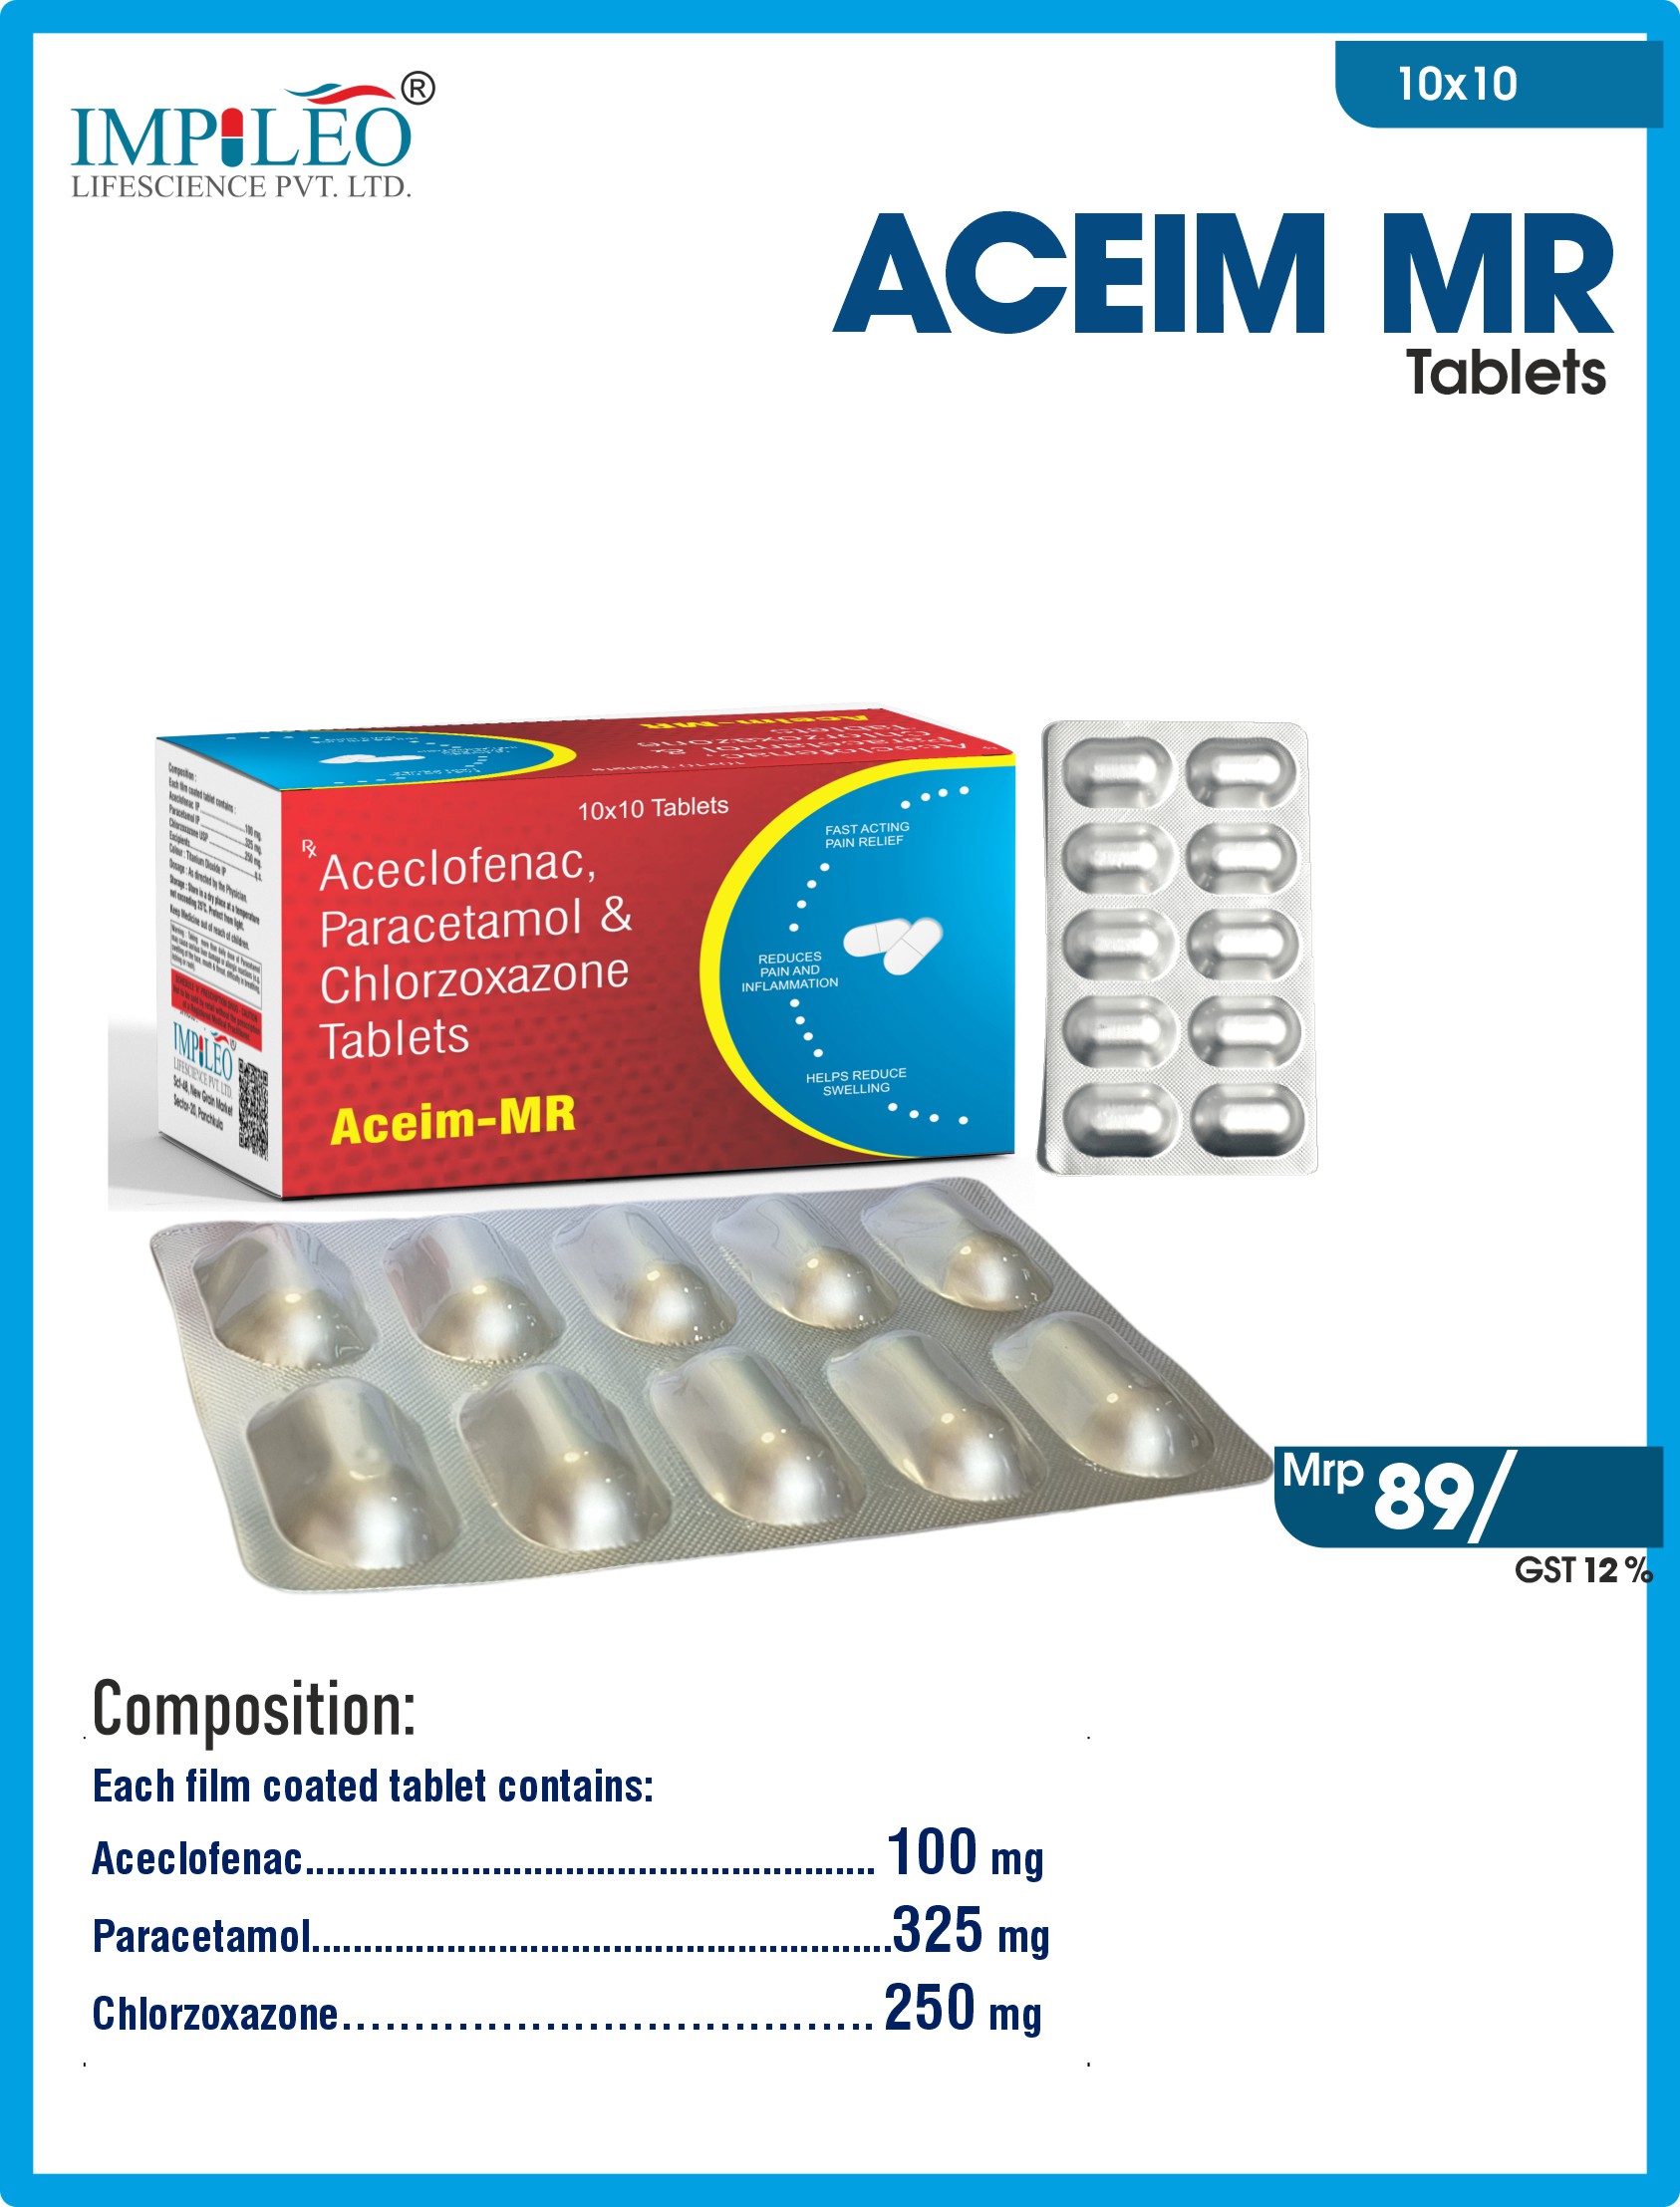 ACEIM-MR Tablets : Top-Quality Aceclofenac, Paracetamol, and Chlorzoxazone Formulation by Trusted Third-Party Manufacturing in Panchkula